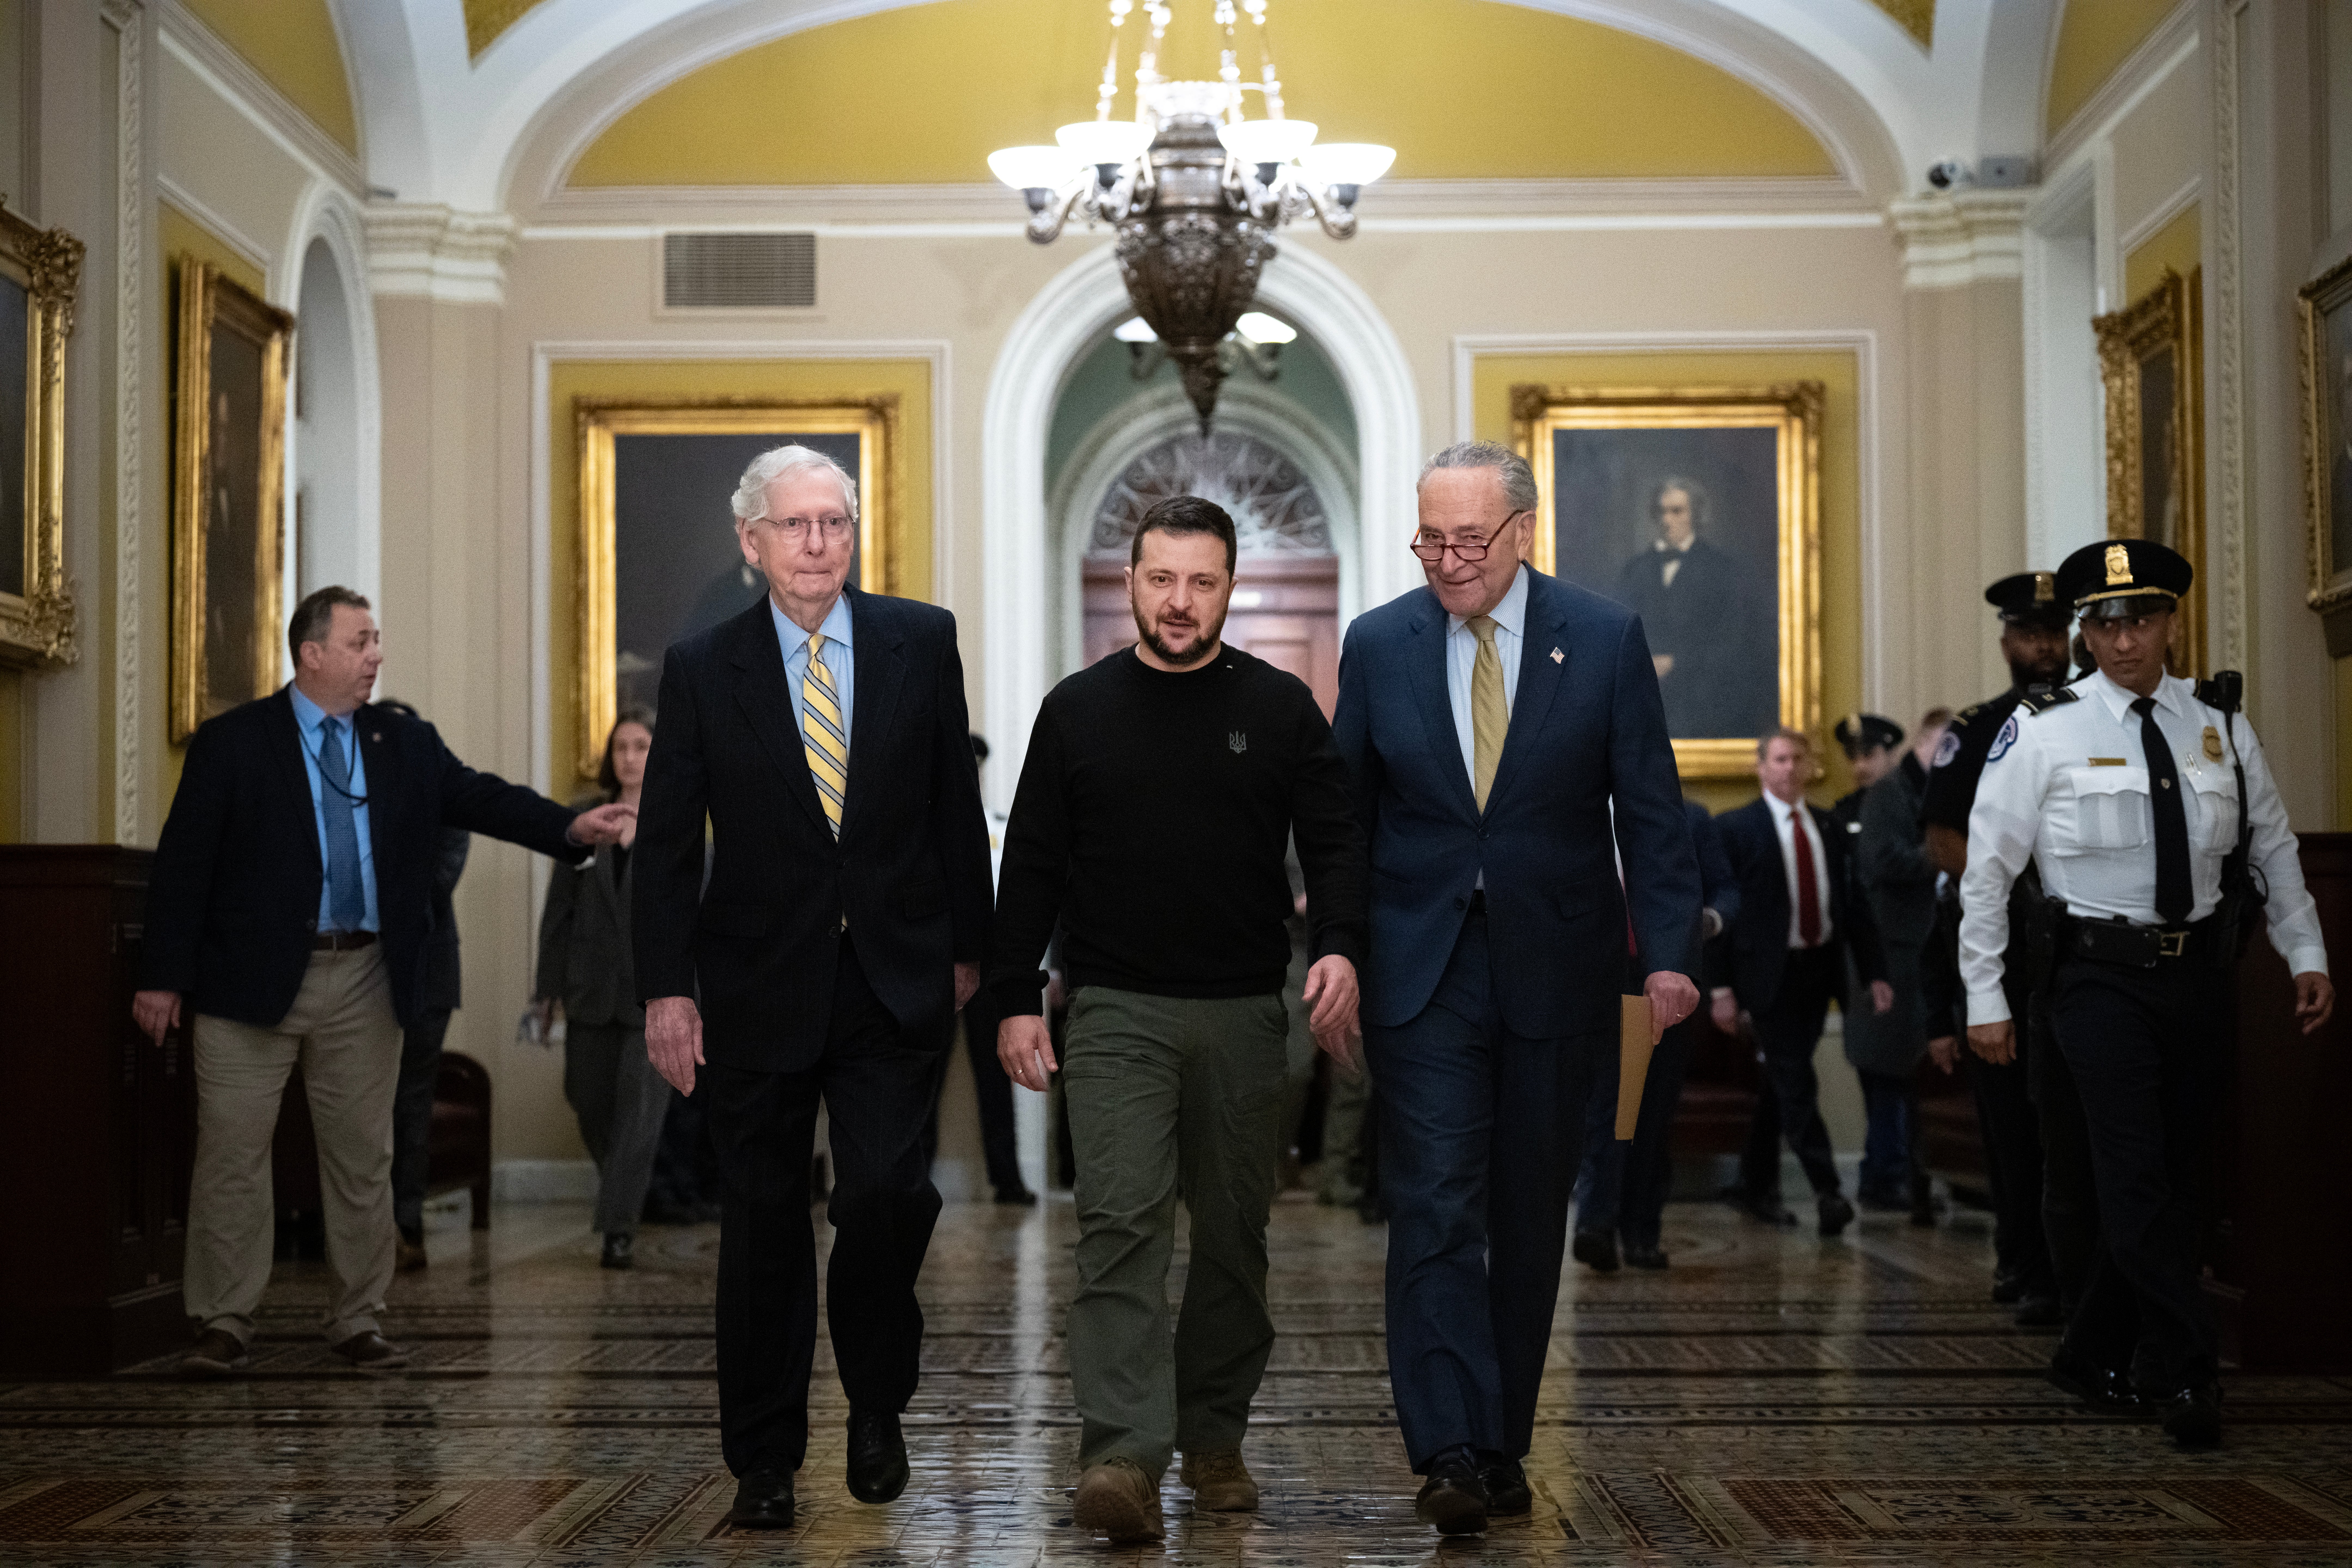 Walking with Senate Minority Leader Mitch McConnell (R-KY) and Senate Majority Leader Chuck Schumer (D-NY), Ukrainian President Volodymyr Zelensky arrives at the U.S. Capitol to meet with Congressional leadership on December 12, 2023 in Washington, DC